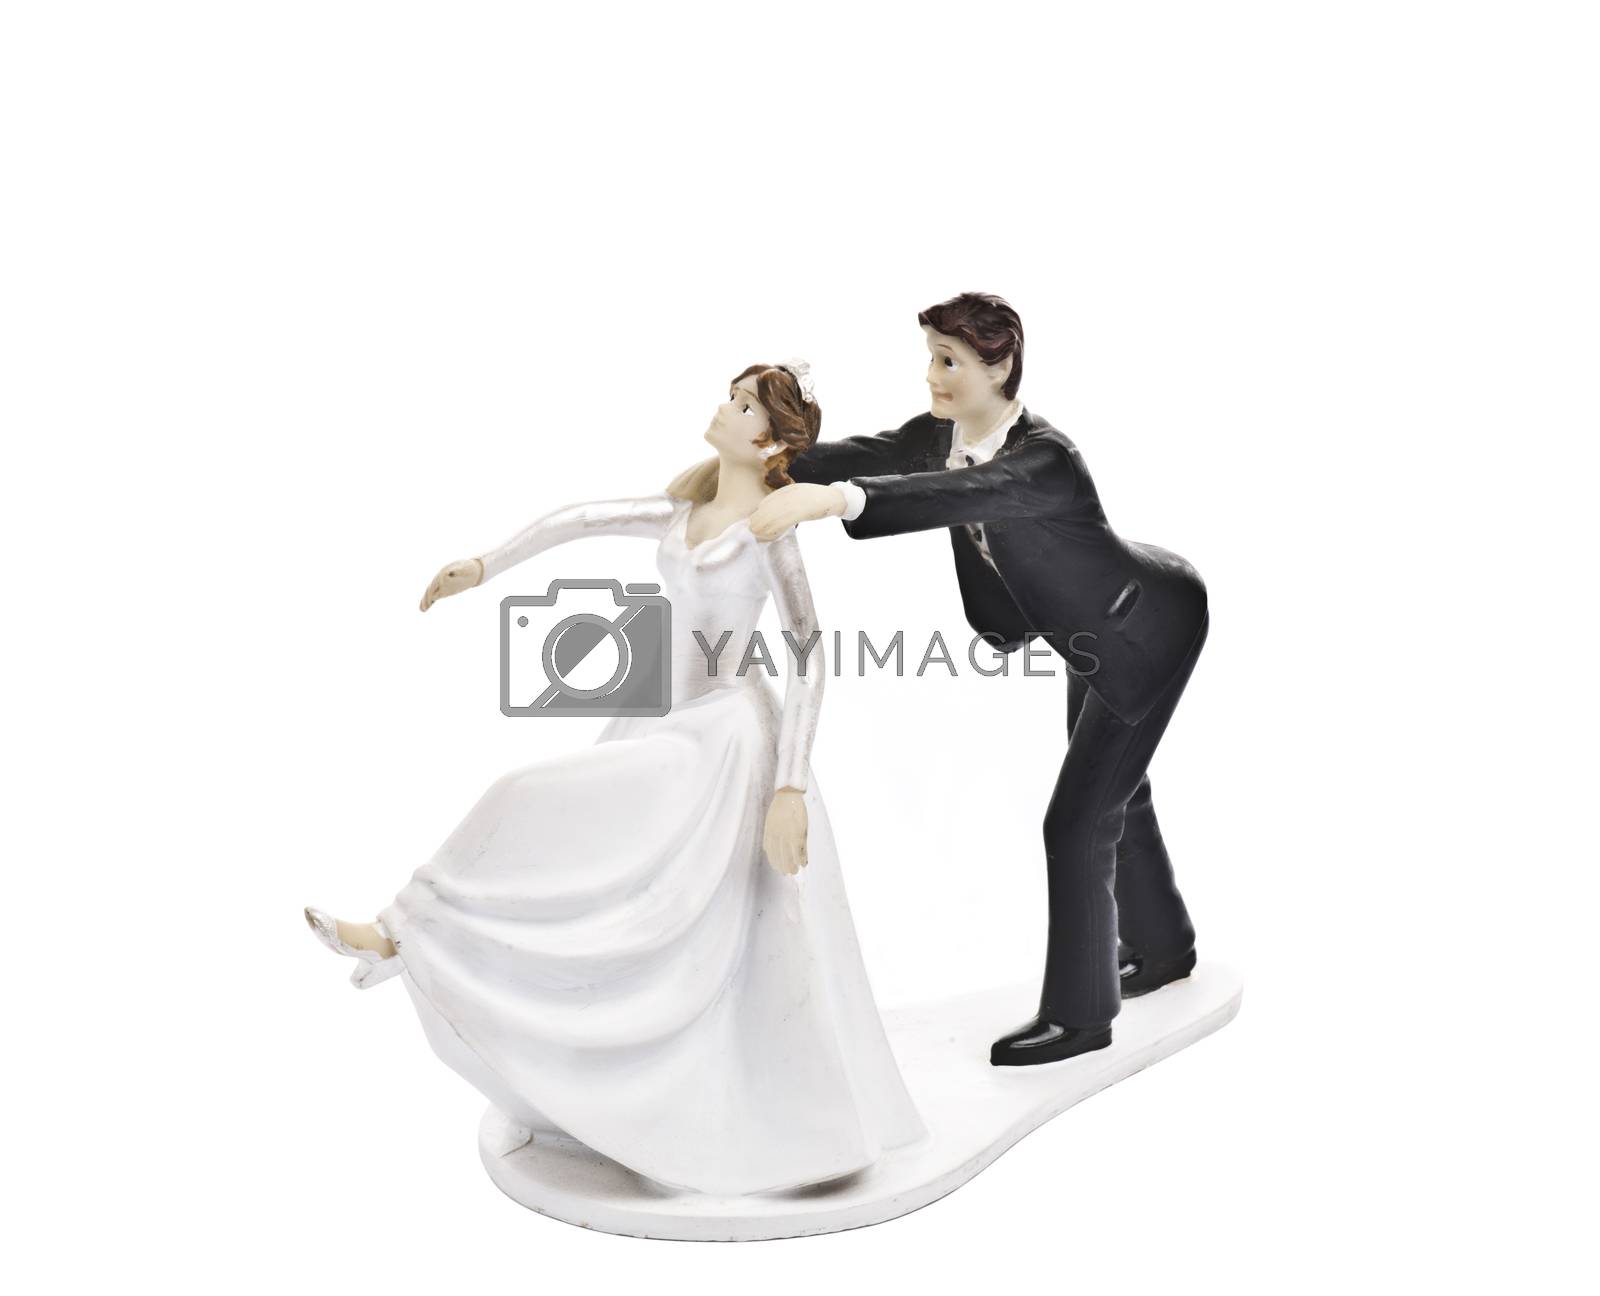 Royalty free image of Couple wedding cake topper isolated on white by marius_dragne